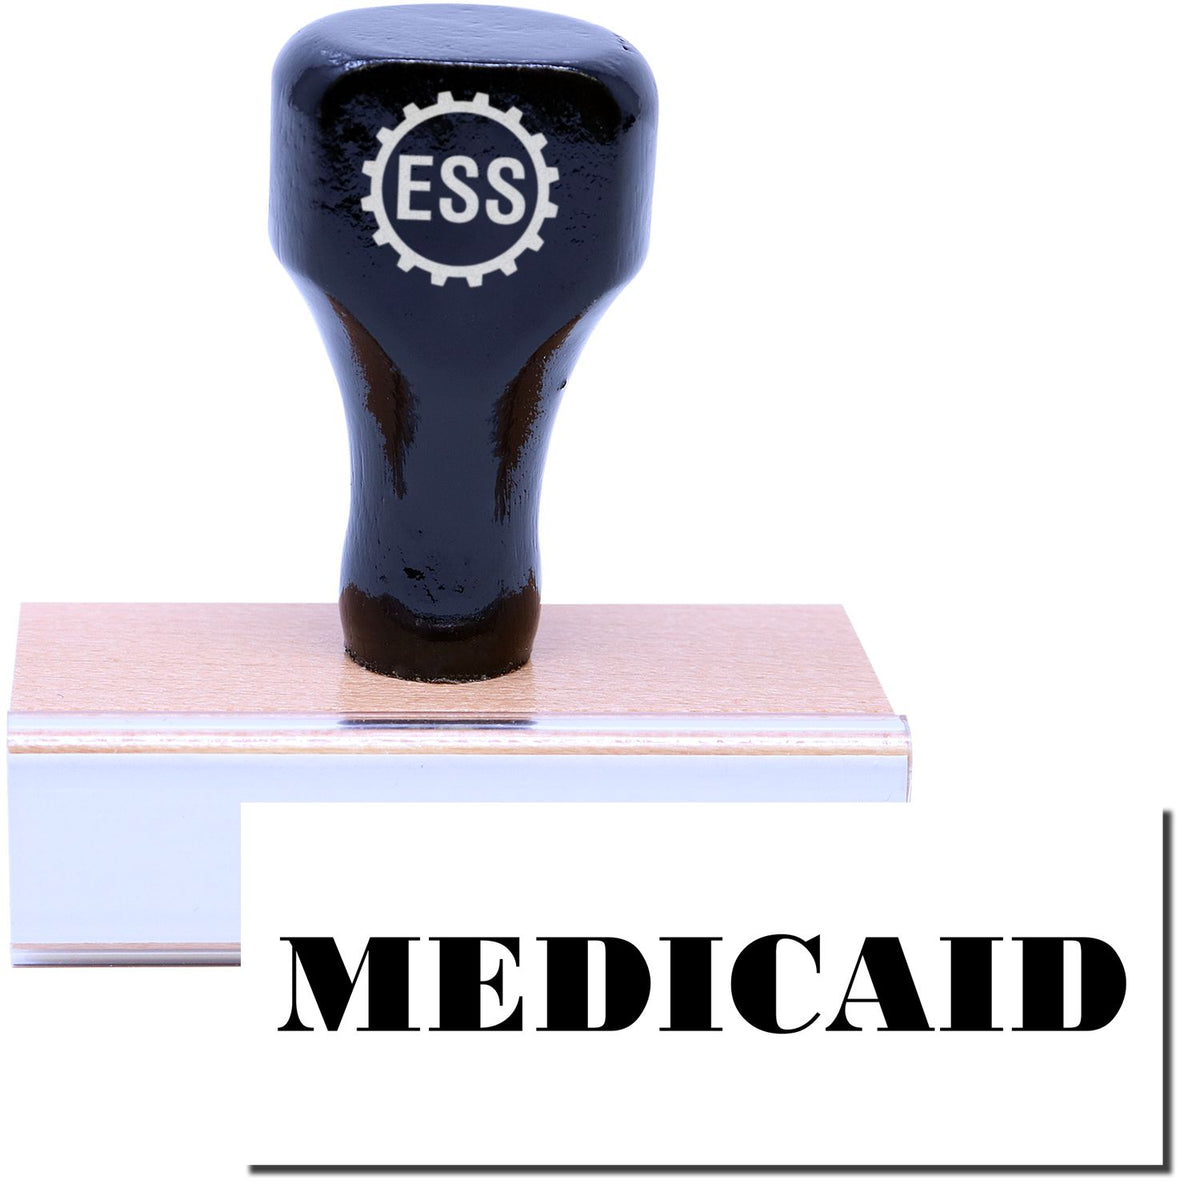 A stock office rubber stamp with a stamped image showing how the text &quot;MEDICAID&quot; in a large font is displayed after stamping.